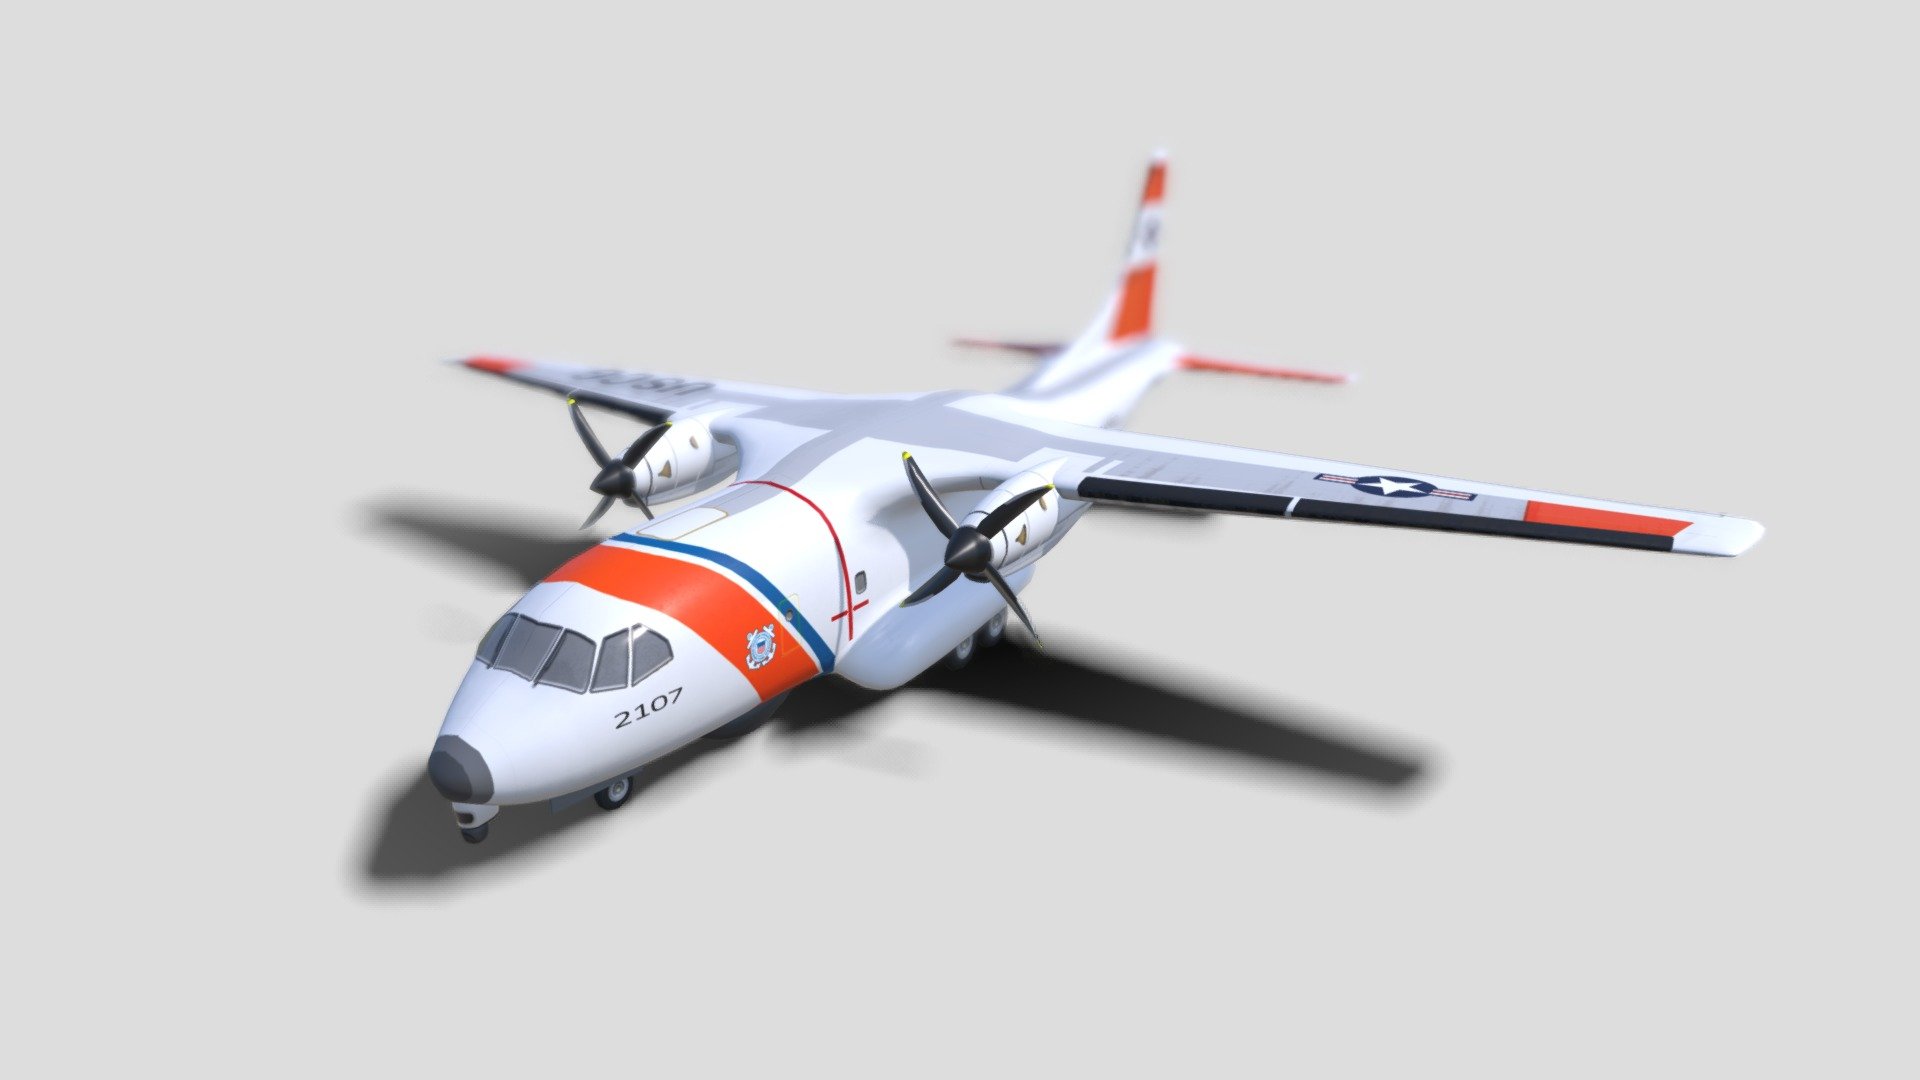 ASG-ISR

EADS CASA HC-144 Ocean Sentry US Coast Guard Marine Patrol Aircraft
Similar to CASA-235

Synthetic Environment Entity for use in Simulation and Training for Intelligence, Surveillance and Reconnaissance (ISR).

Separate Props objects and undercarriage can be controlled in-game.

Modelled in Blender

US Coast Guard Livery
Low poly model
Accuratly modelled off plan and using photo reference
1 LOD
2 UV texture map 4096
no animation
no materials
albedo map and basic roughness map
28862 triangles
Modelled in Blender using subdivision

CASA-235 cargo version available

http://www.asg-isr.com - HC-144 Ocean Sentry US Coast Guard Marine Patrol - 3D model by ASG-ISR 3d model